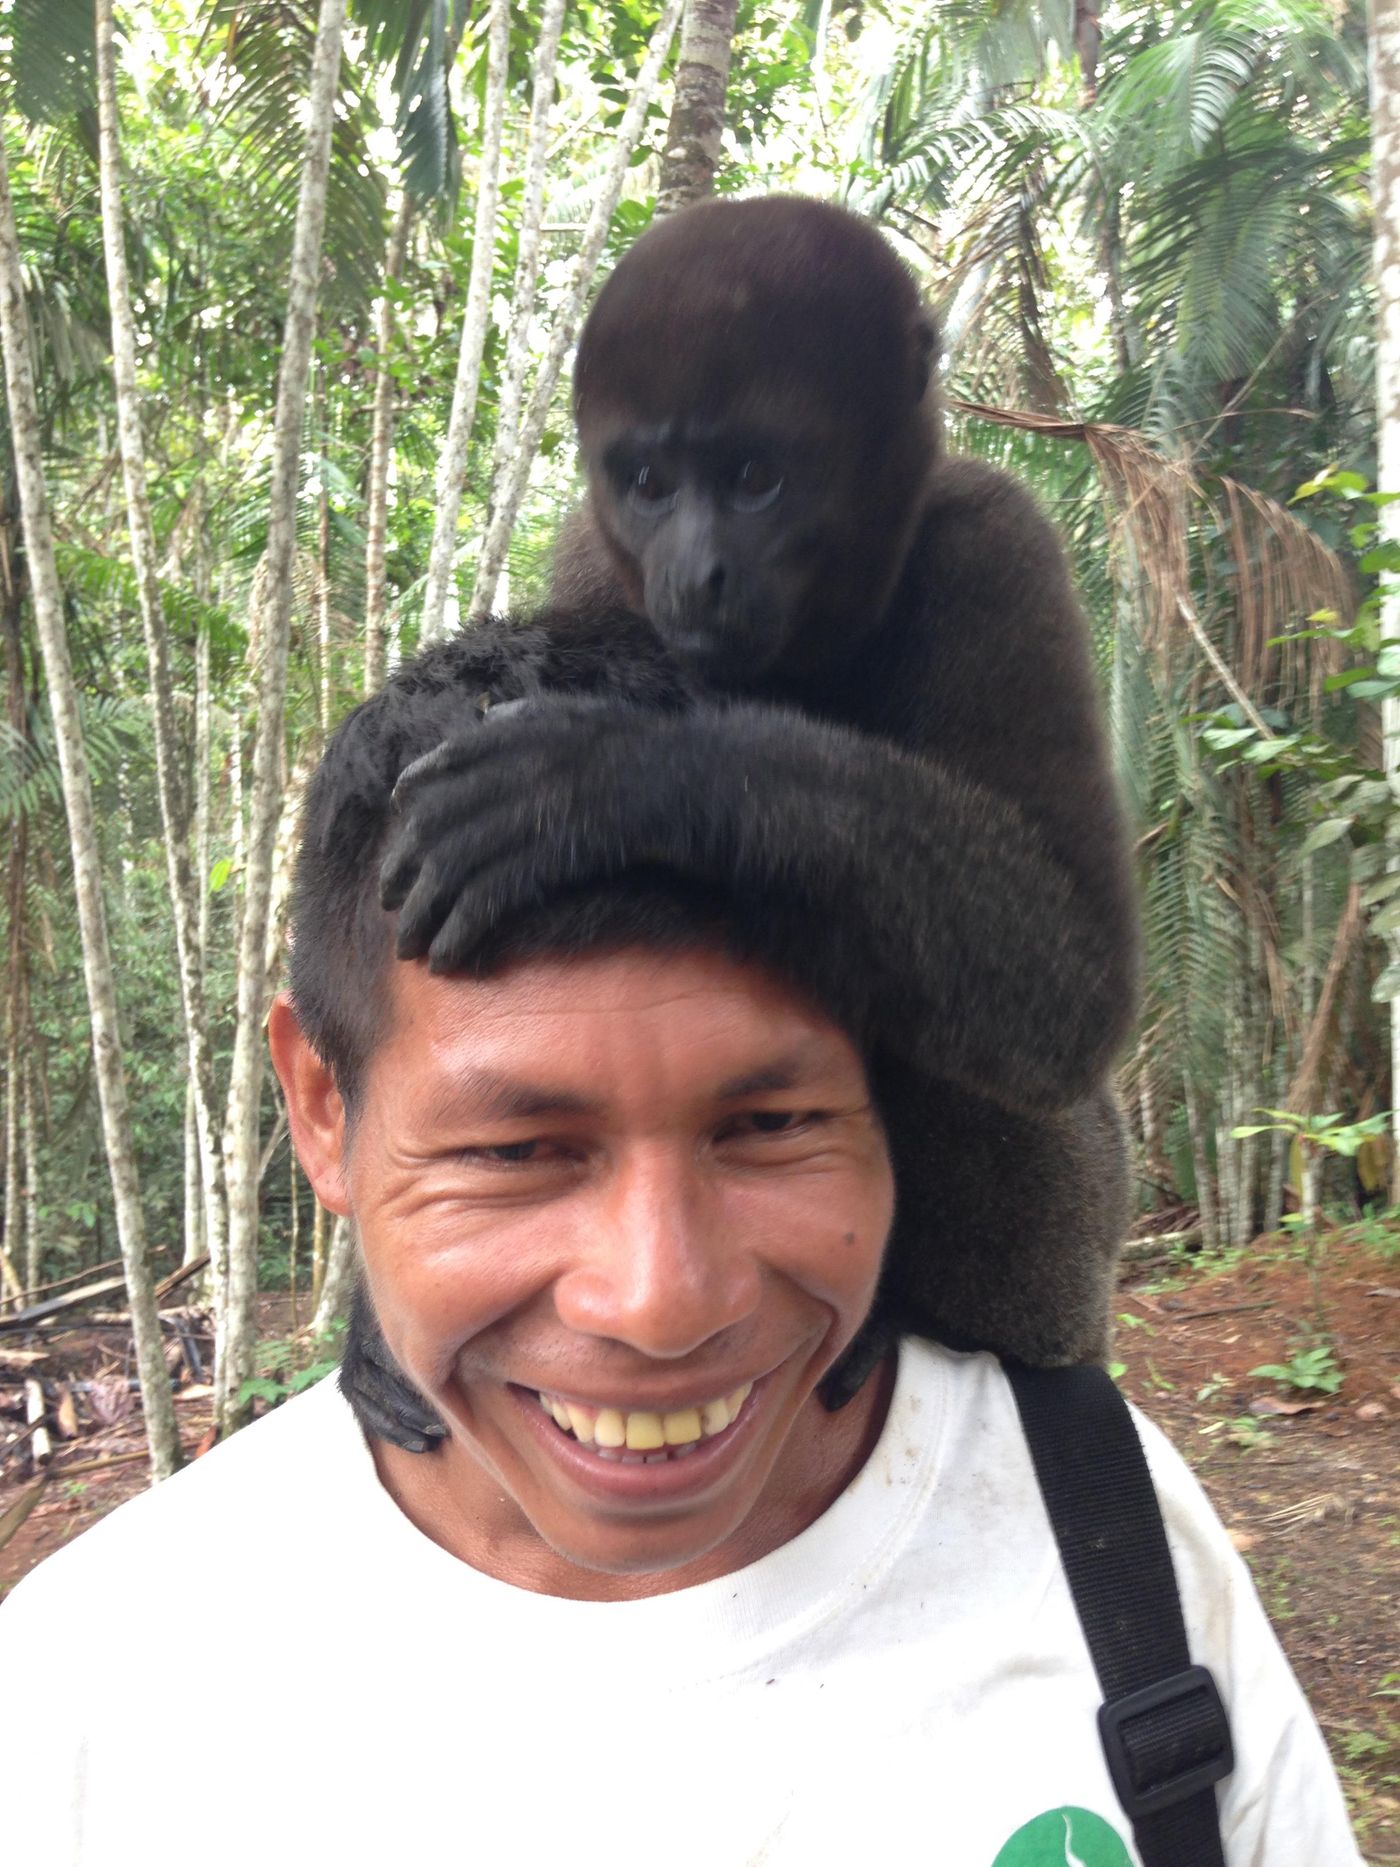 A local guide with Rafa perched atop his head